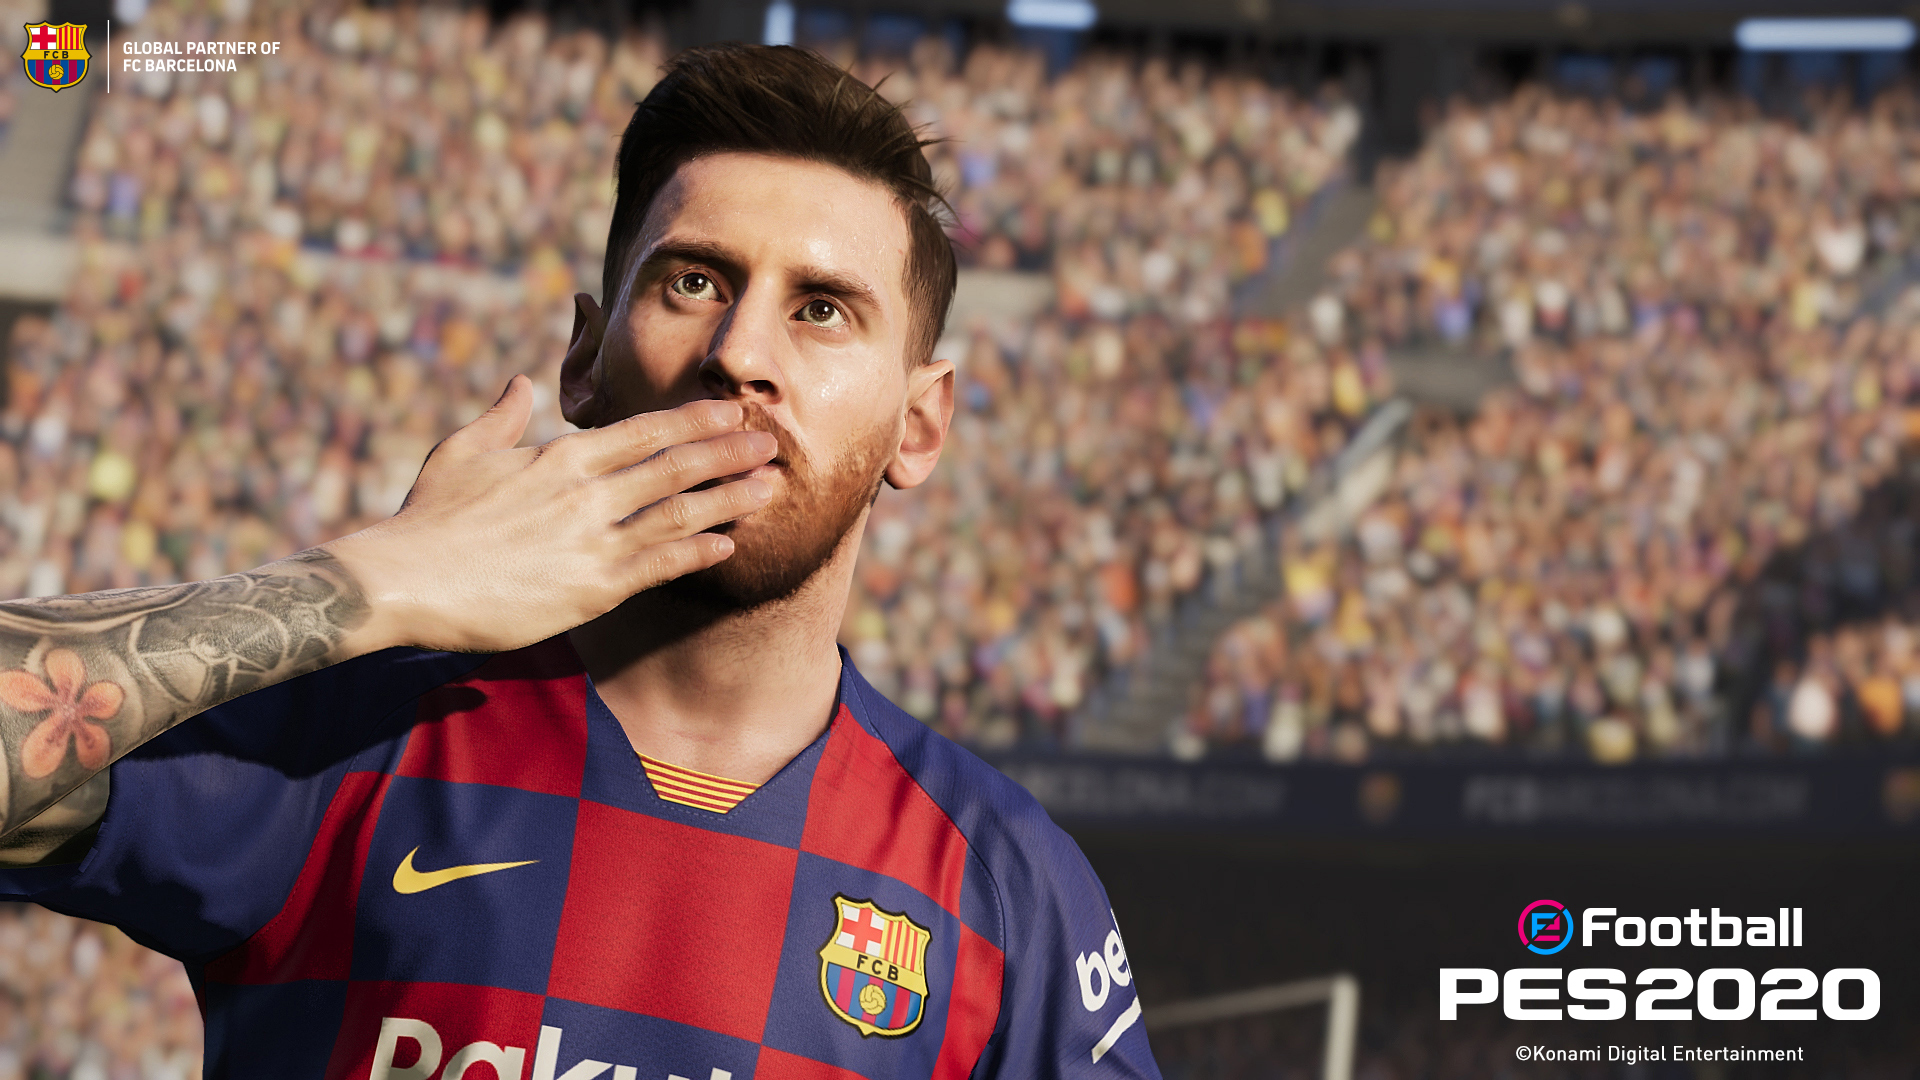 20 vs PES 2020 comparison: which teams and leagues are exclusive to which | GamesRadar+